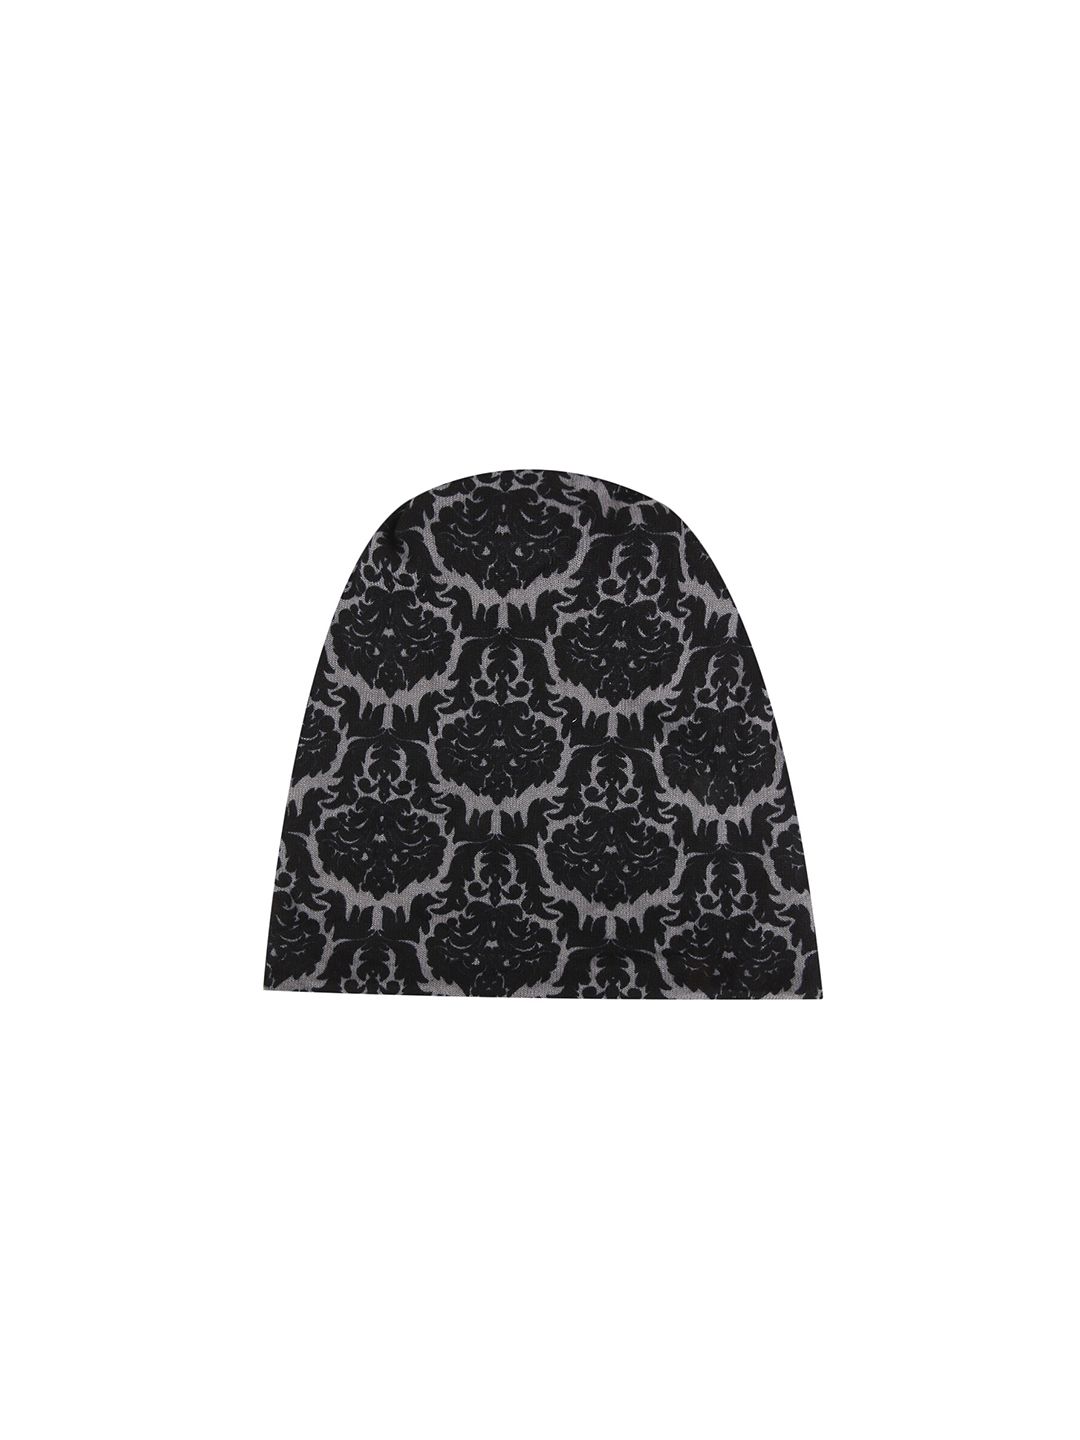 iSWEVEN Unisex Black & Grey Printed Cotton Beanie Price in India